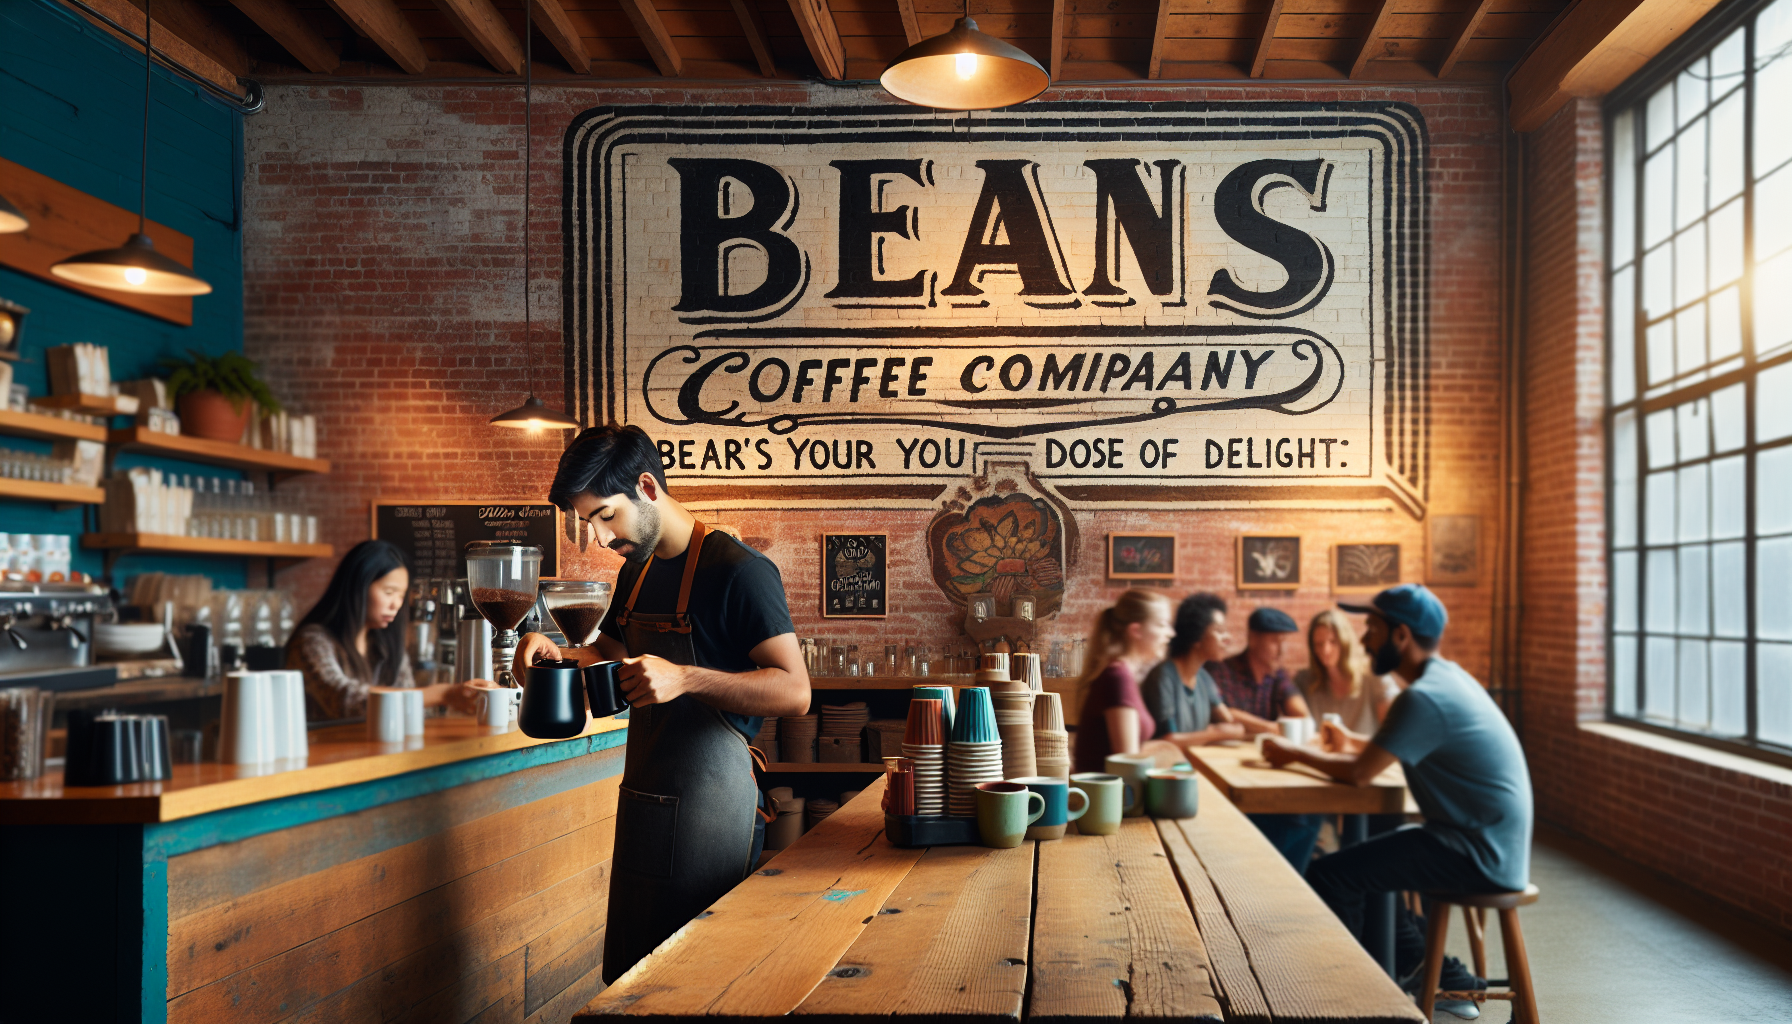 A rustic brick coffee shop with a large painted sign on the side that reads 'Beans Coffee Company: Your Daily Dose of Delight'. On the foreground, a barista with Hispanic descent pours coffee into a m